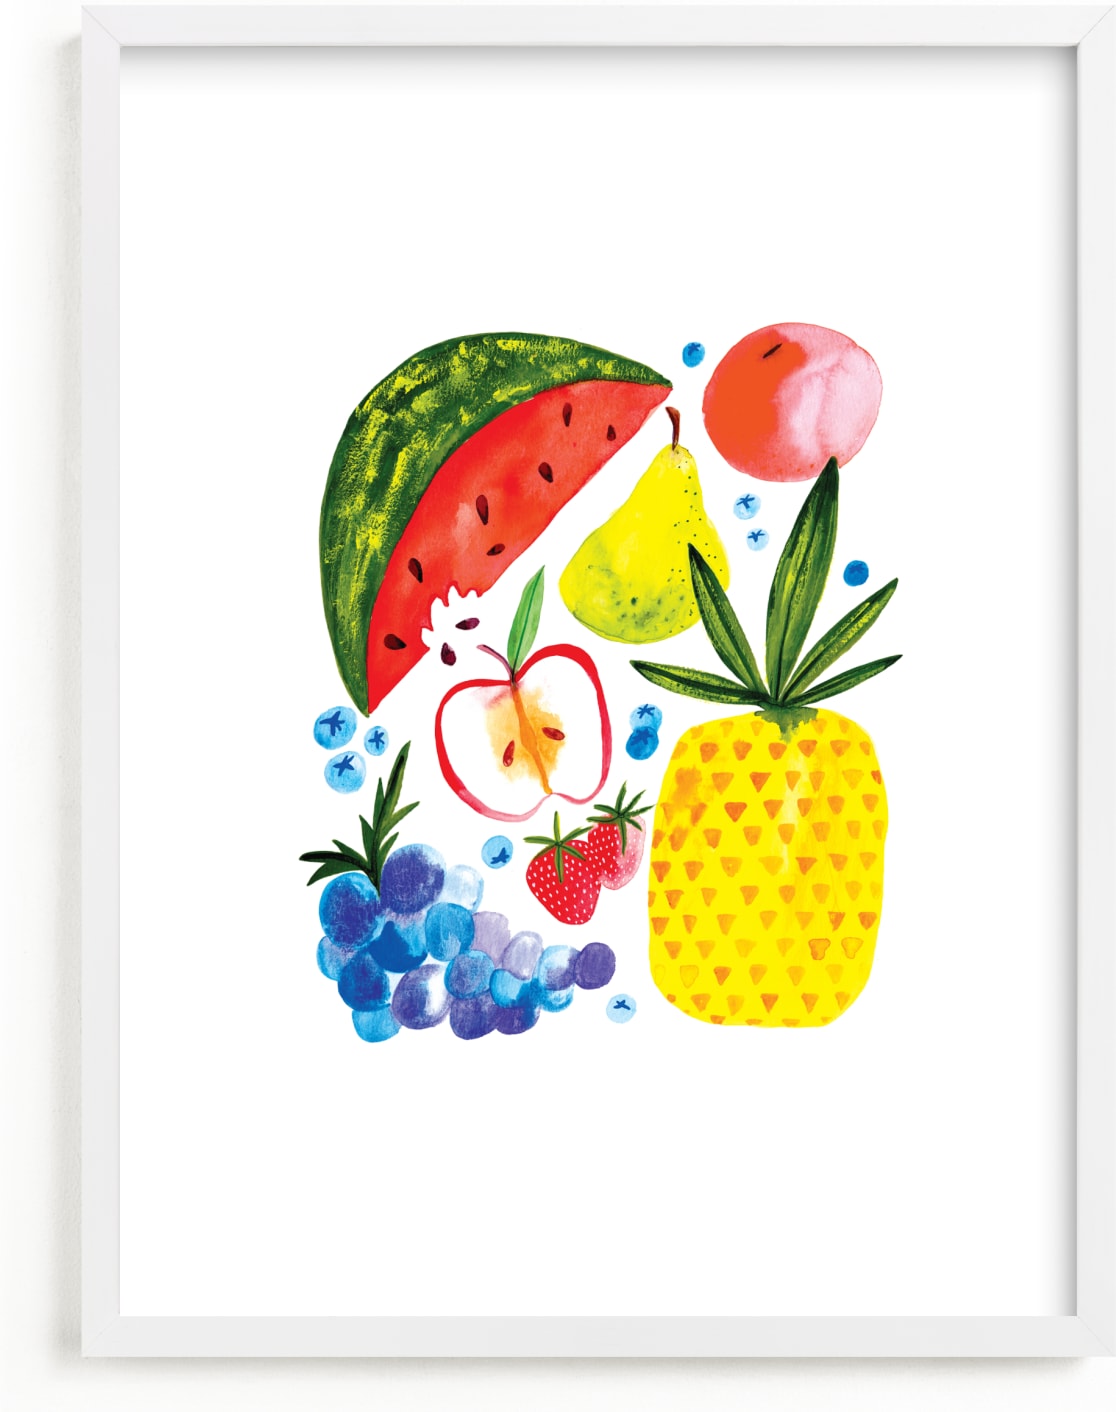 This is a colorful kids wall art by Patrice Horvath called Fruit Family.